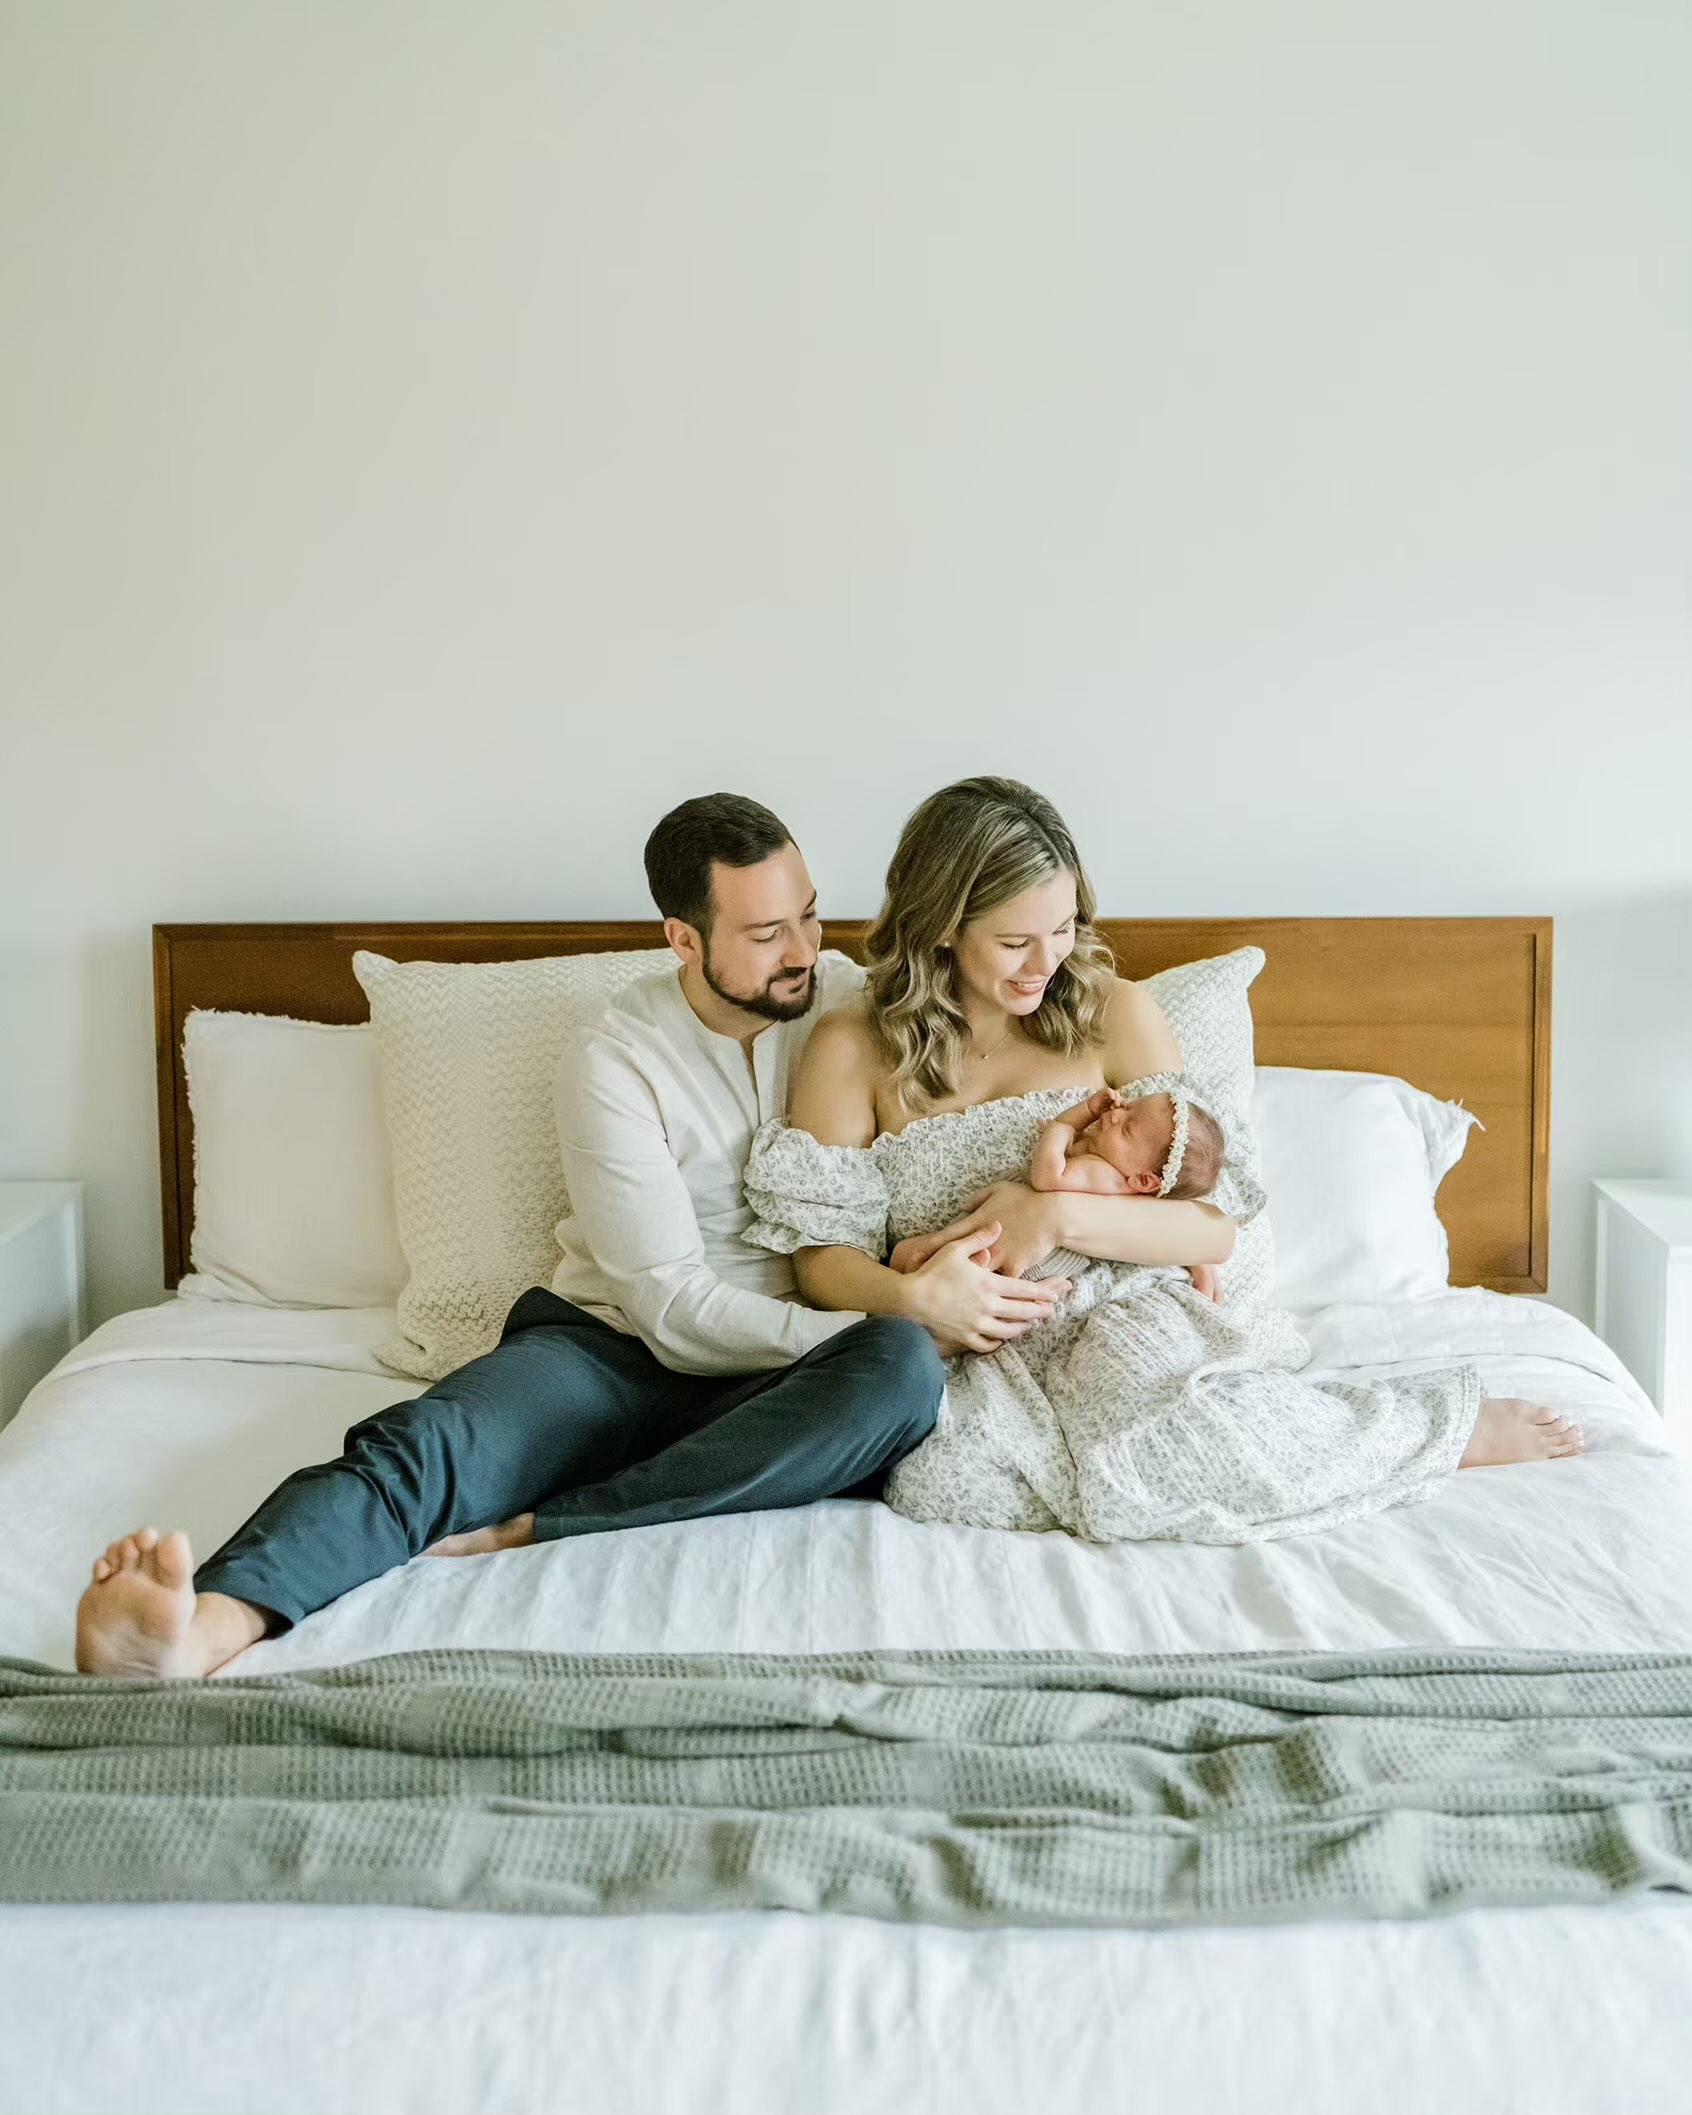 Man and woman sit on bed while holding newborn